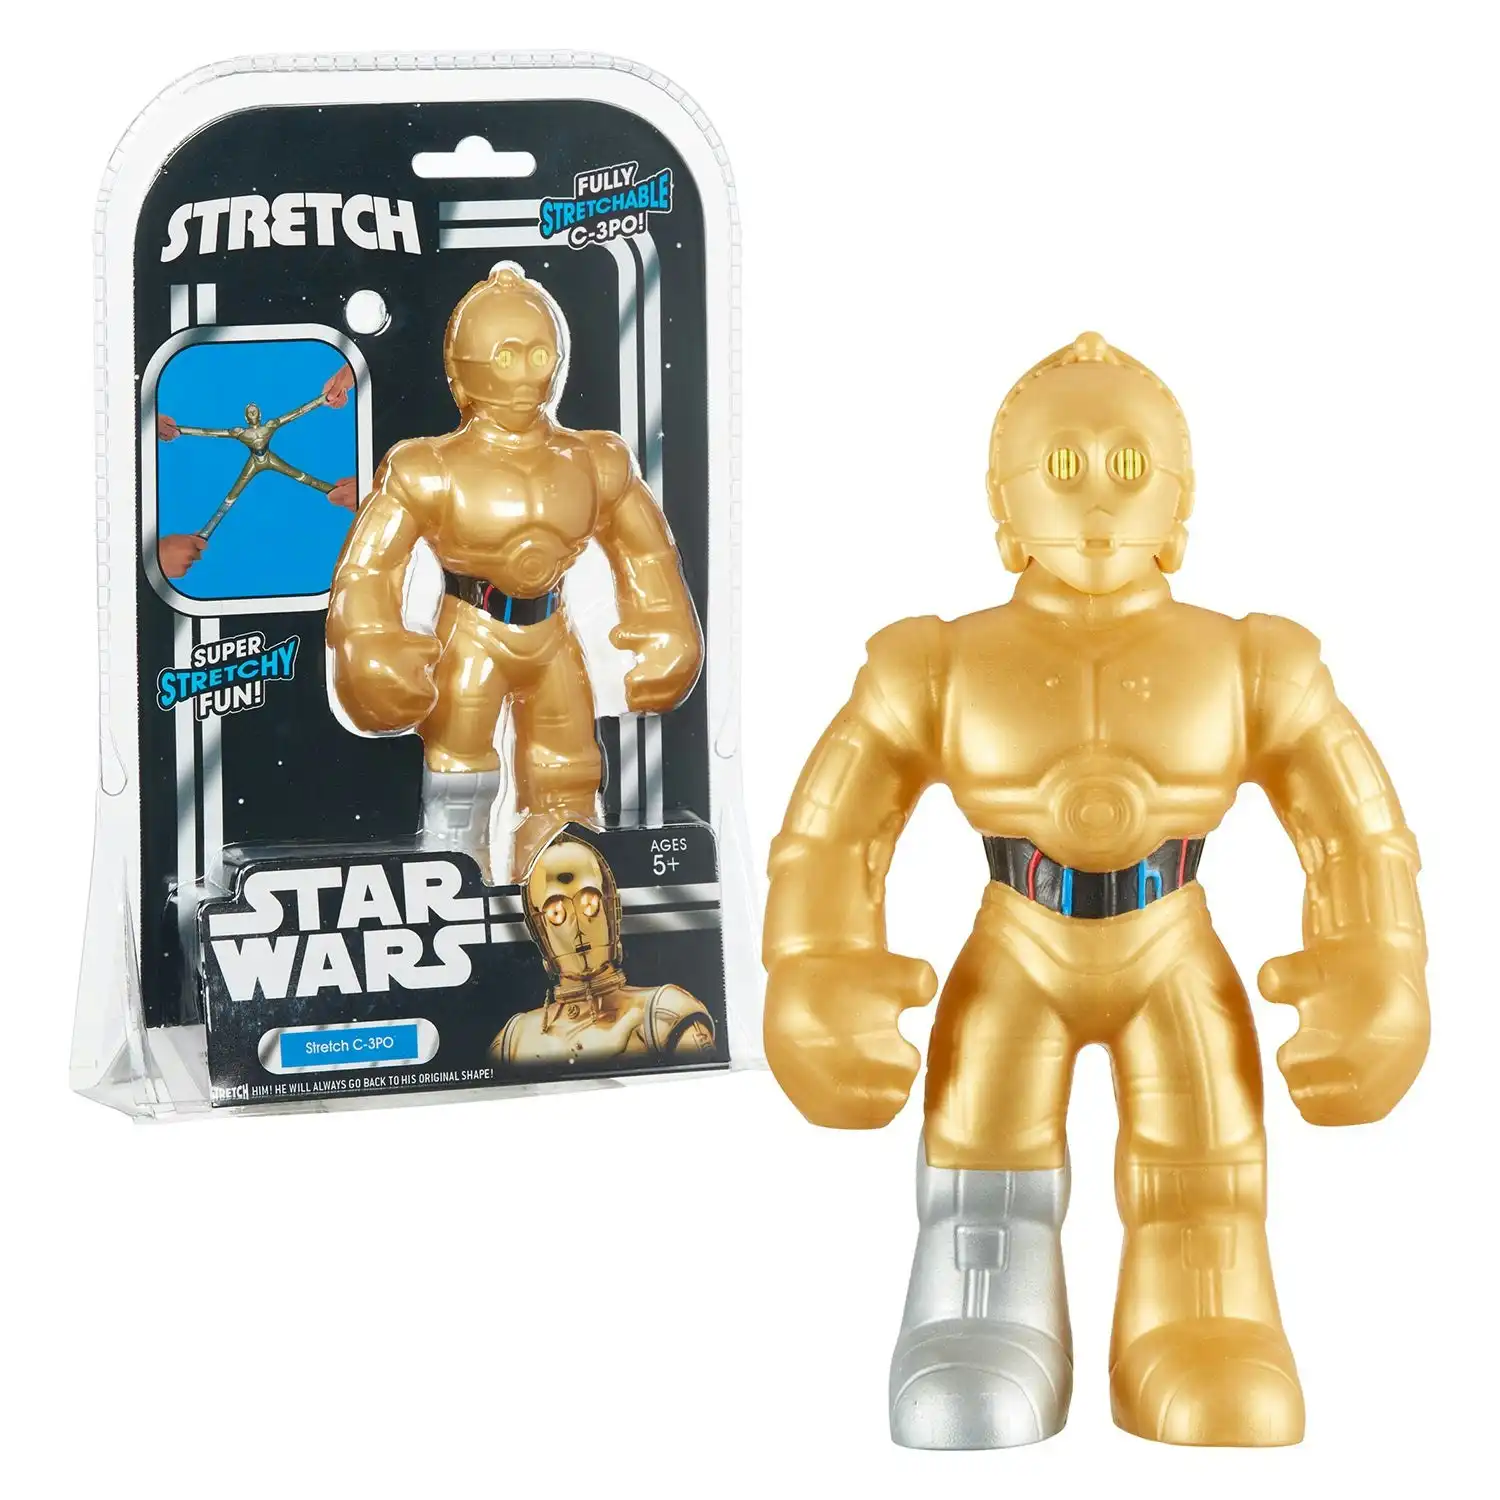 Mini Stretch Armstrong - C3PO